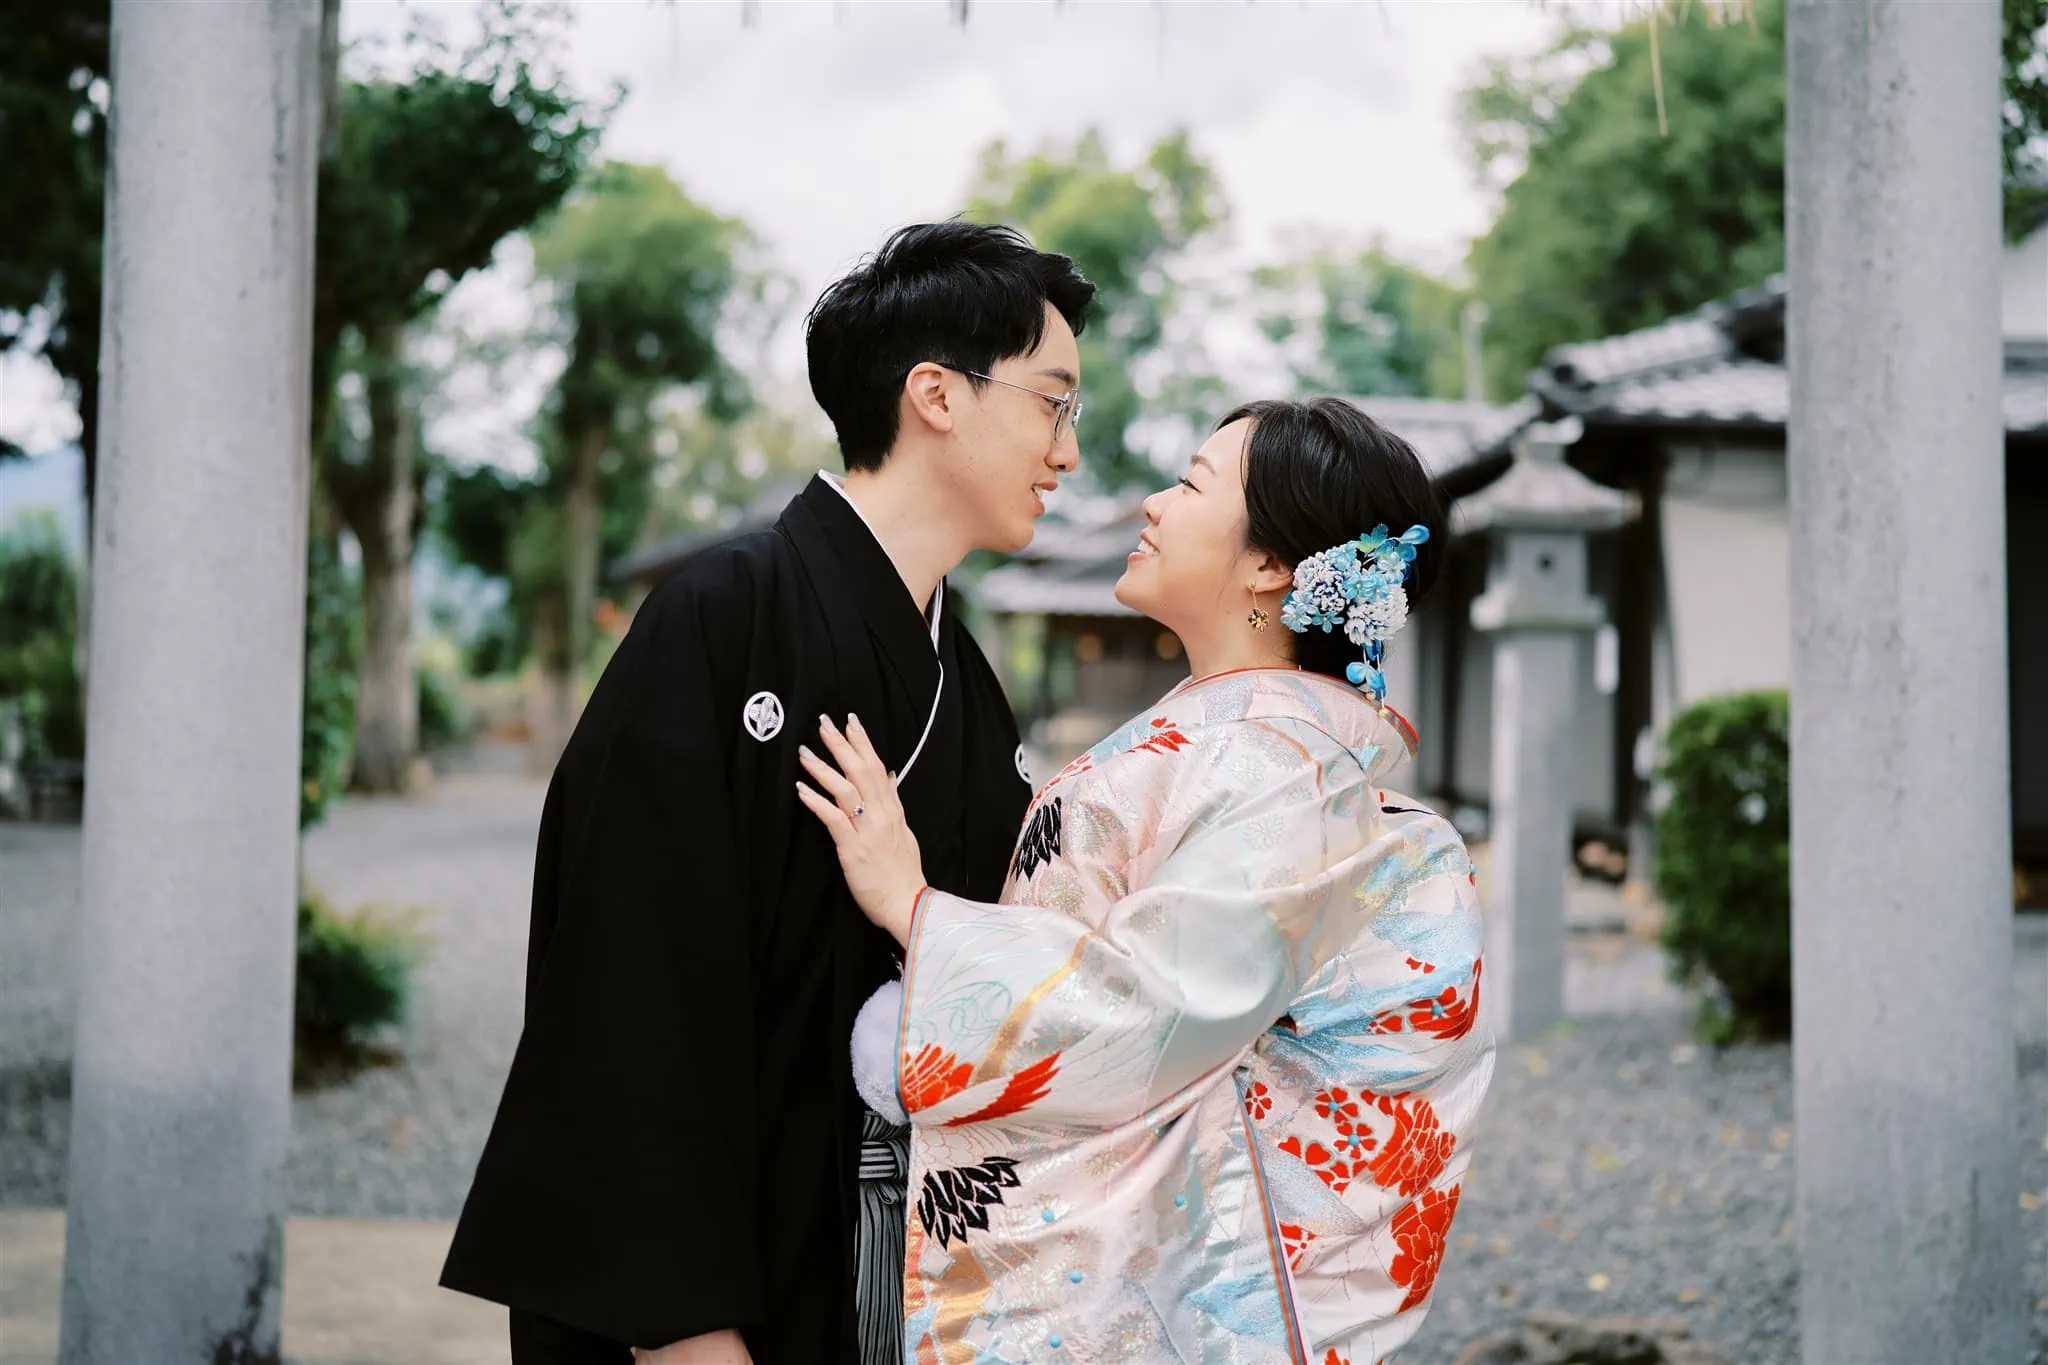 Kyoto Tokyo Japan Elopement Wedding Photographer, Planner & Videographer | A japanese couple in traditional kimono attire captured by an elopement photographer.